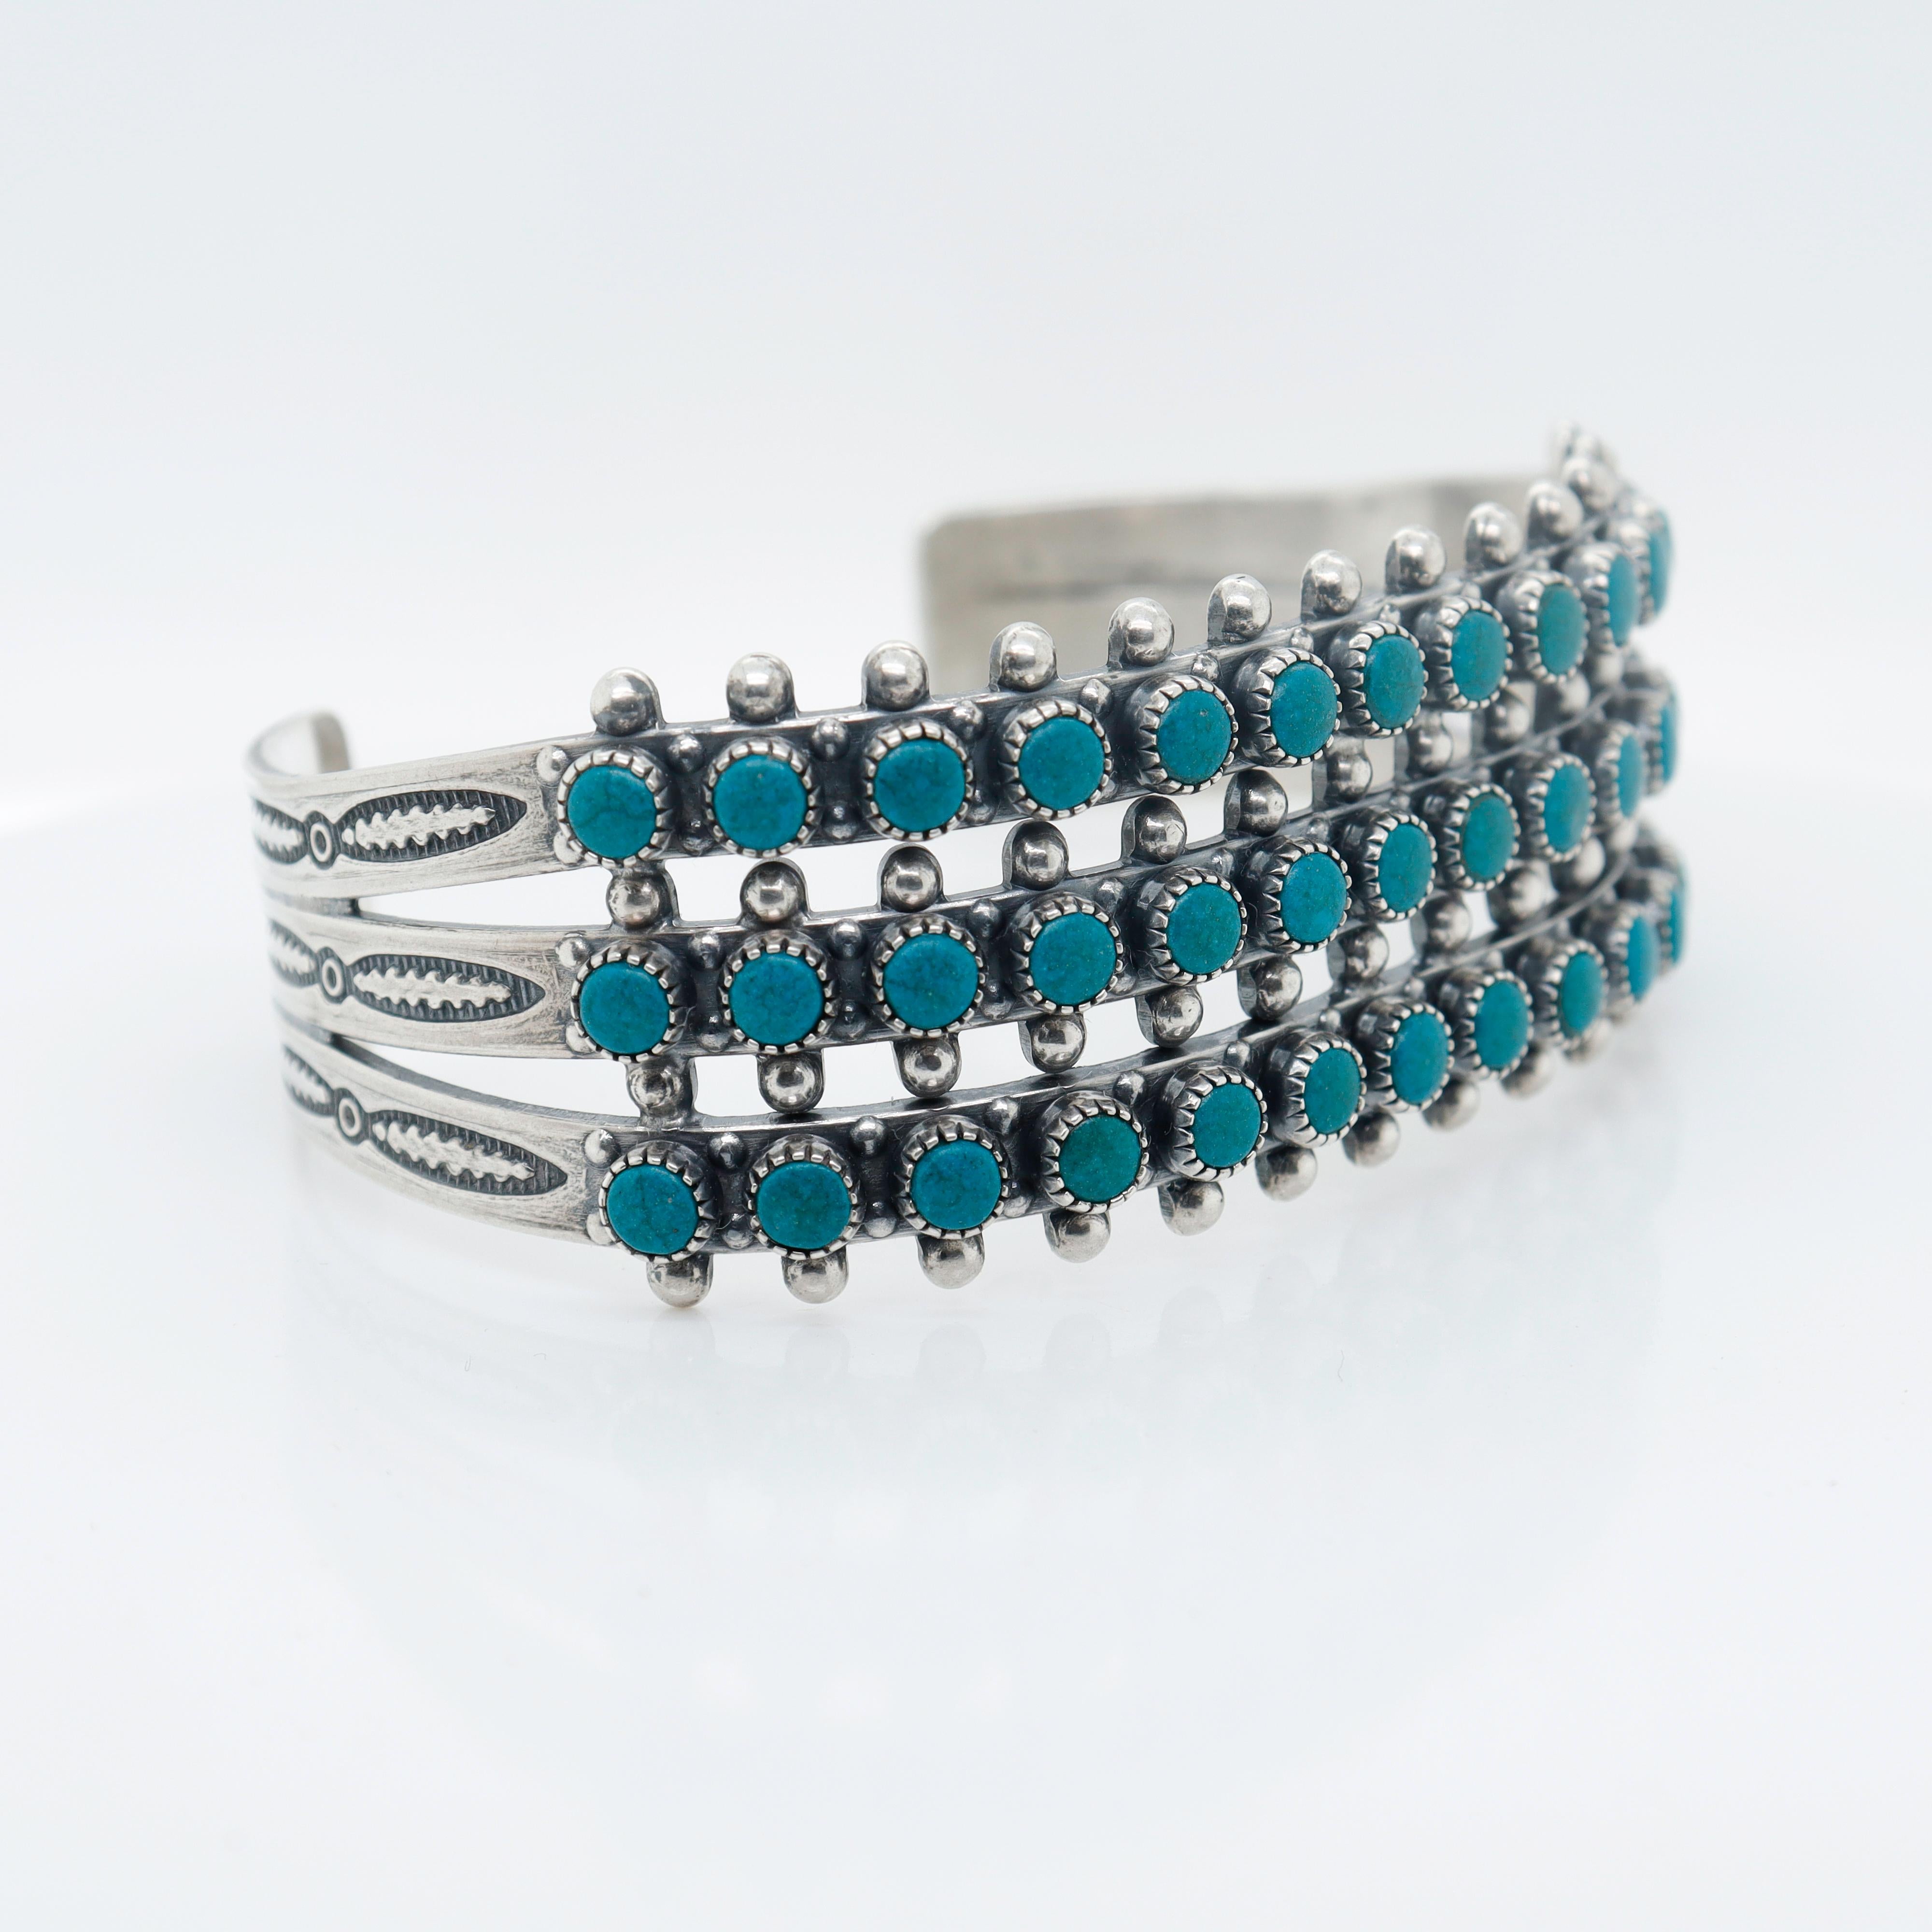 A fine turquoise Zuni Pueblo cuff bracelet.

In sterling silver.

Bezel set with 3 row of small turquoise cabochons.

Simply a wonderful Southwestern bracelet!

 Date:
20th Century

Overall Condition:
It is in overall good, as-pictured, used estate